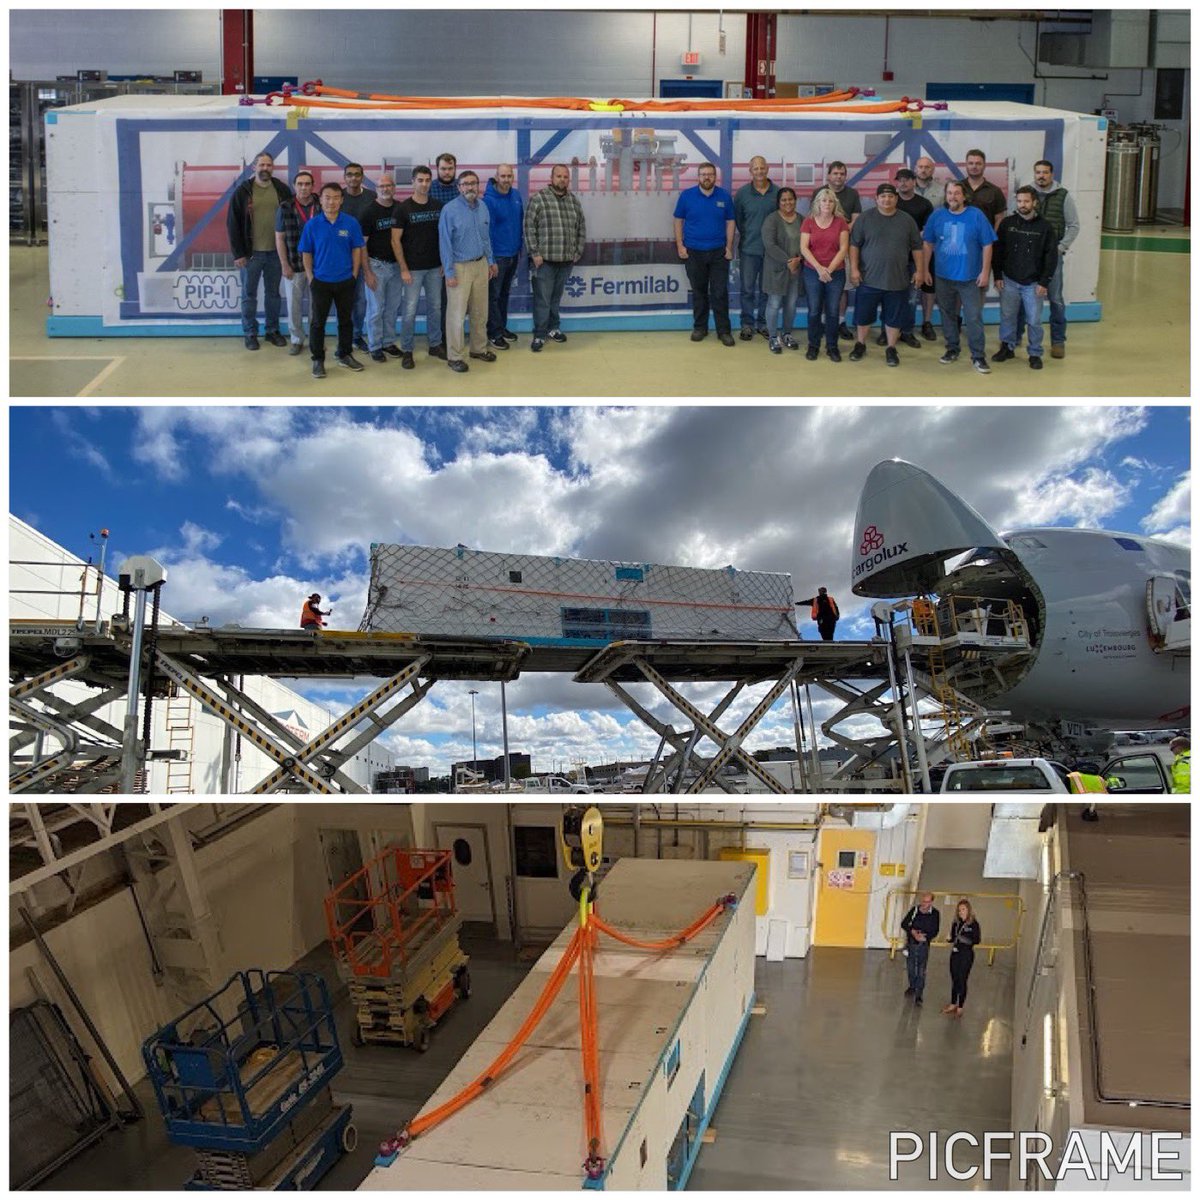 Today the dummy HB650 cryomodule arrived in the UK at #UKRI after its journey from Chicago! We will now analyze the transport data and learn good lessons to apply to the prototype HB650 cryomodule that will follow the same route early next year. Great job #pip2 transport team!